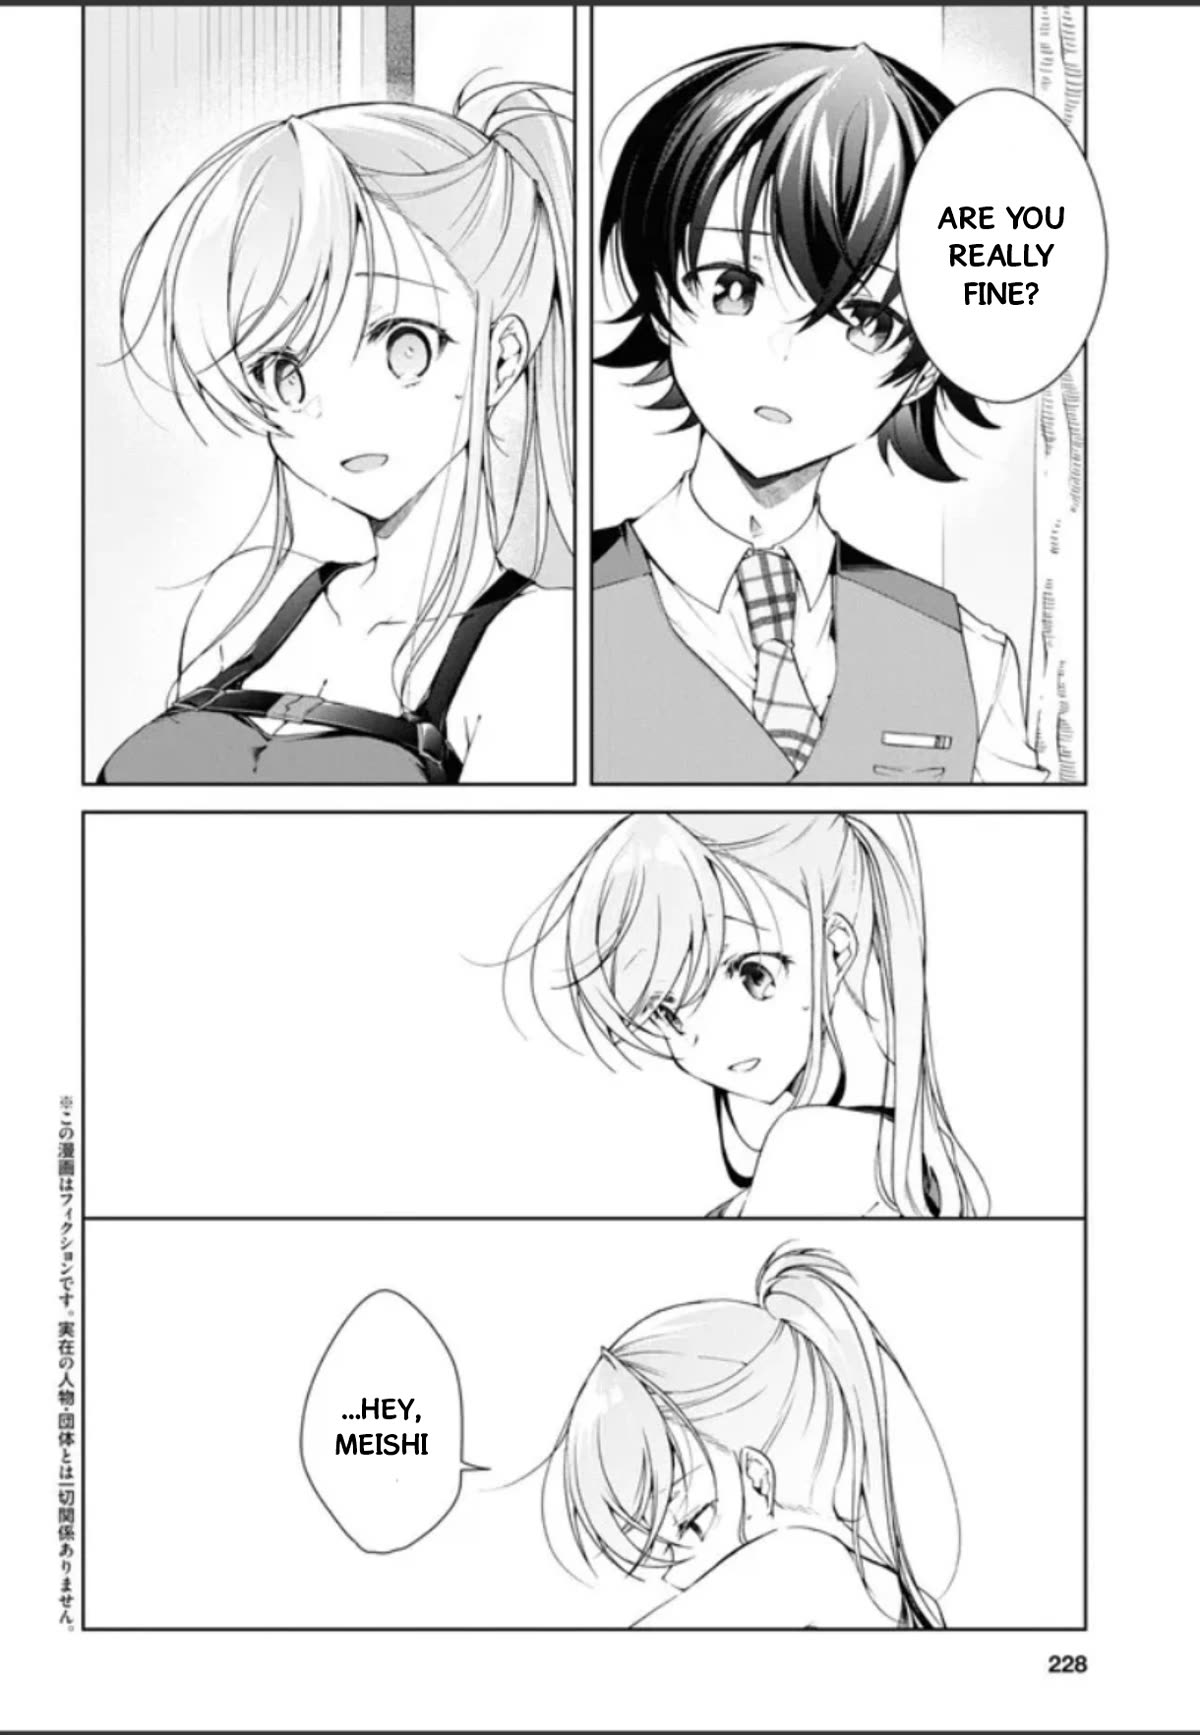 Isshiki-san Wants to Know About Love. - chapter 32.5 - #3